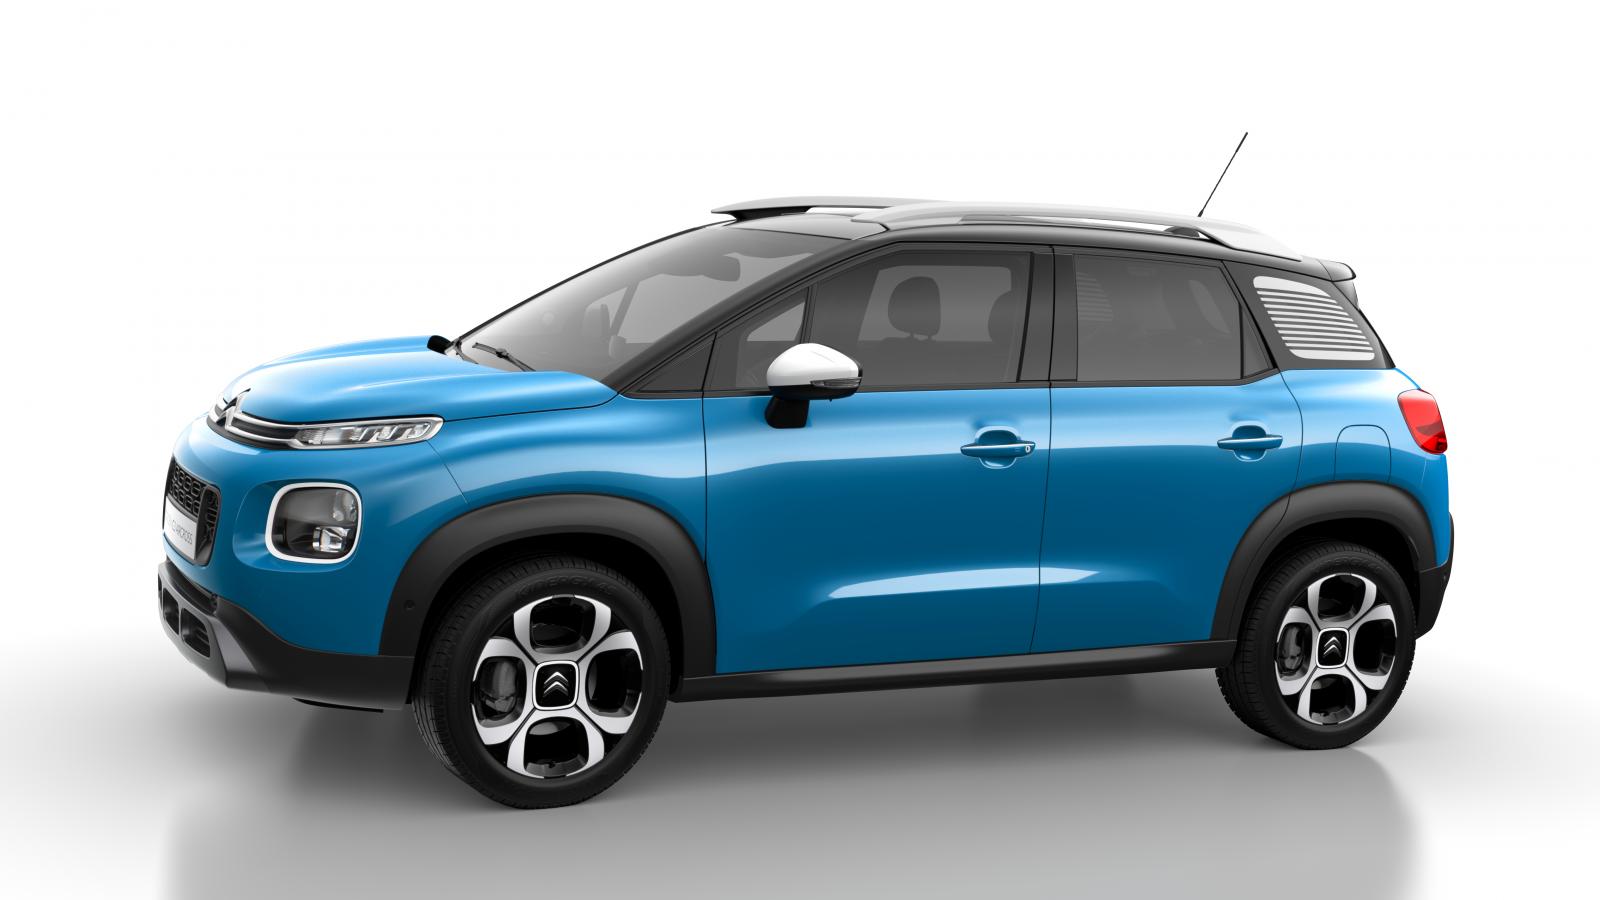 C3 Aircross Compact SUV - Breathing Blue